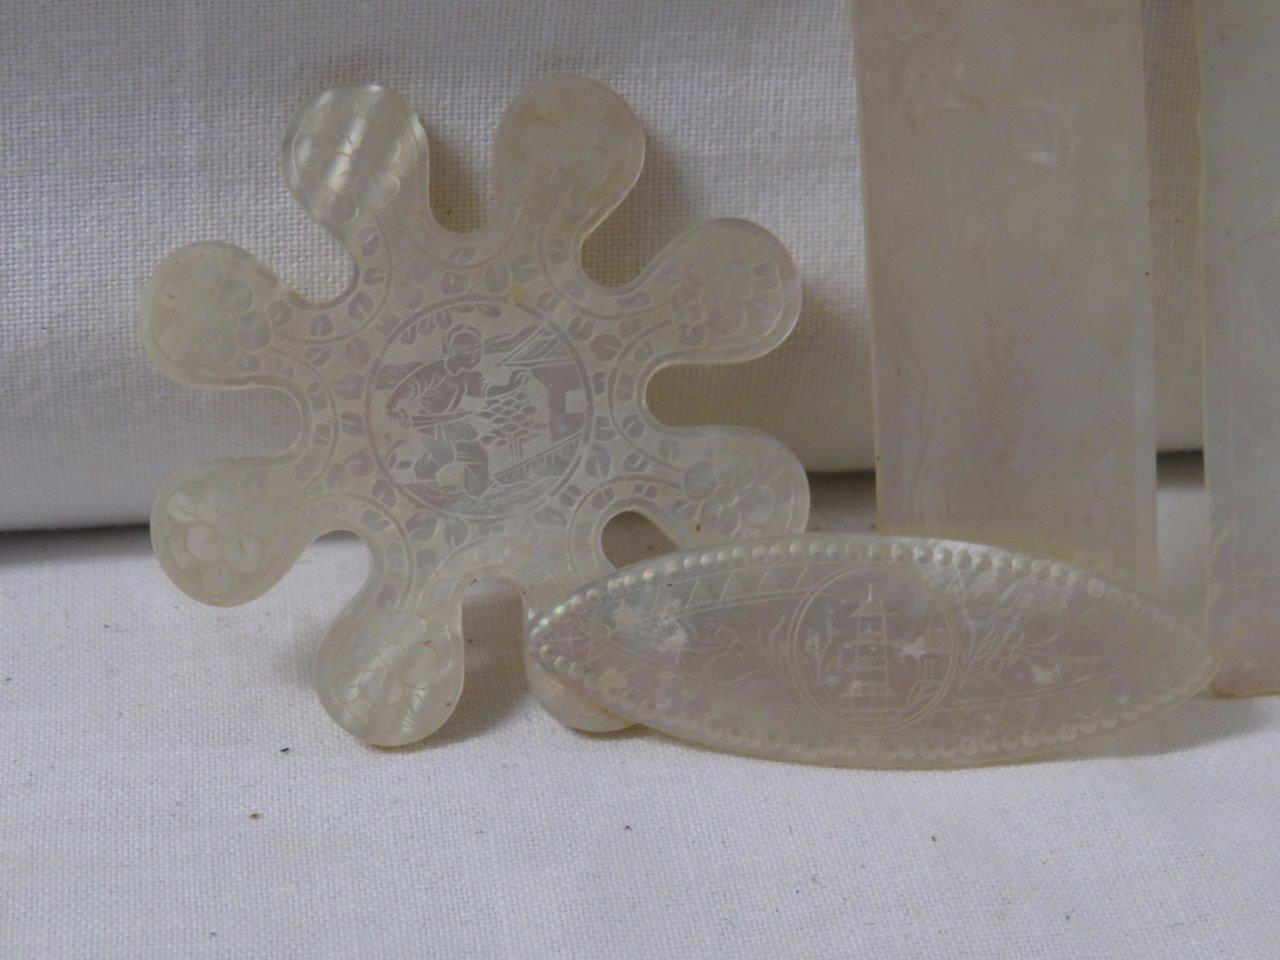 About twenty-five assorted mother of pearl gaming counters of various shapes, fish, circular, - Image 2 of 3